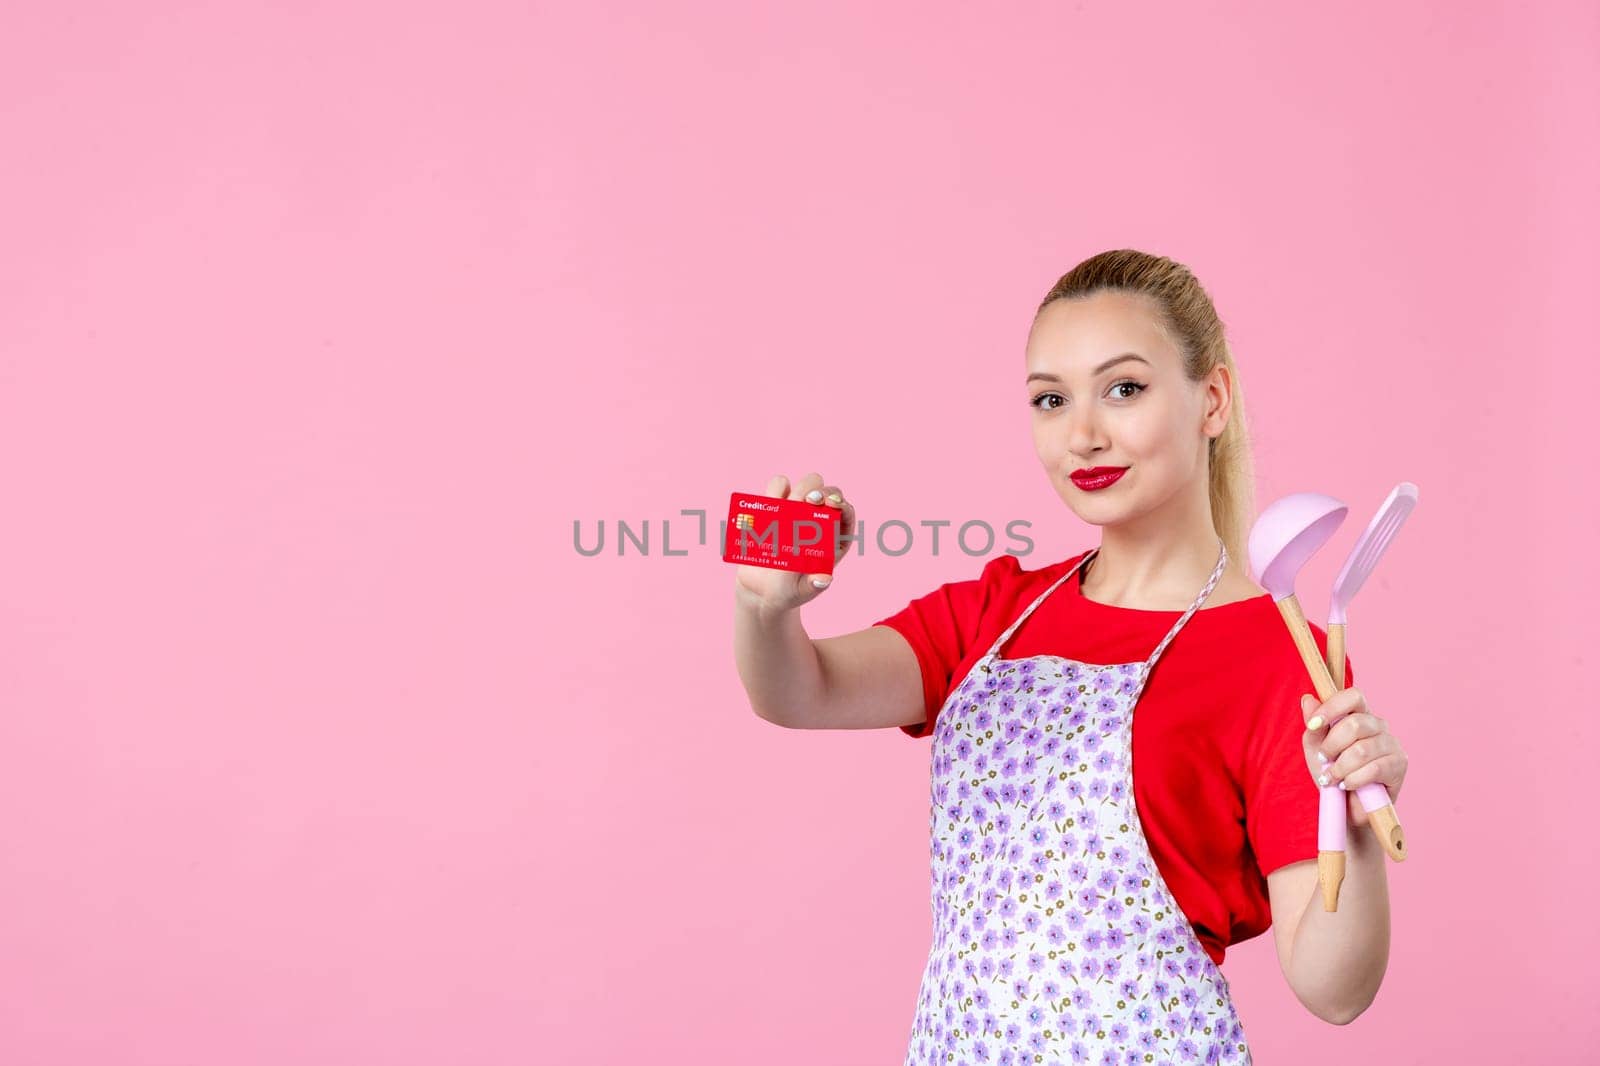 front view young housewife in cape holding spoons and bank card on pink background occupation duty money horizontal wife profession uniform job cutlery by Kamran